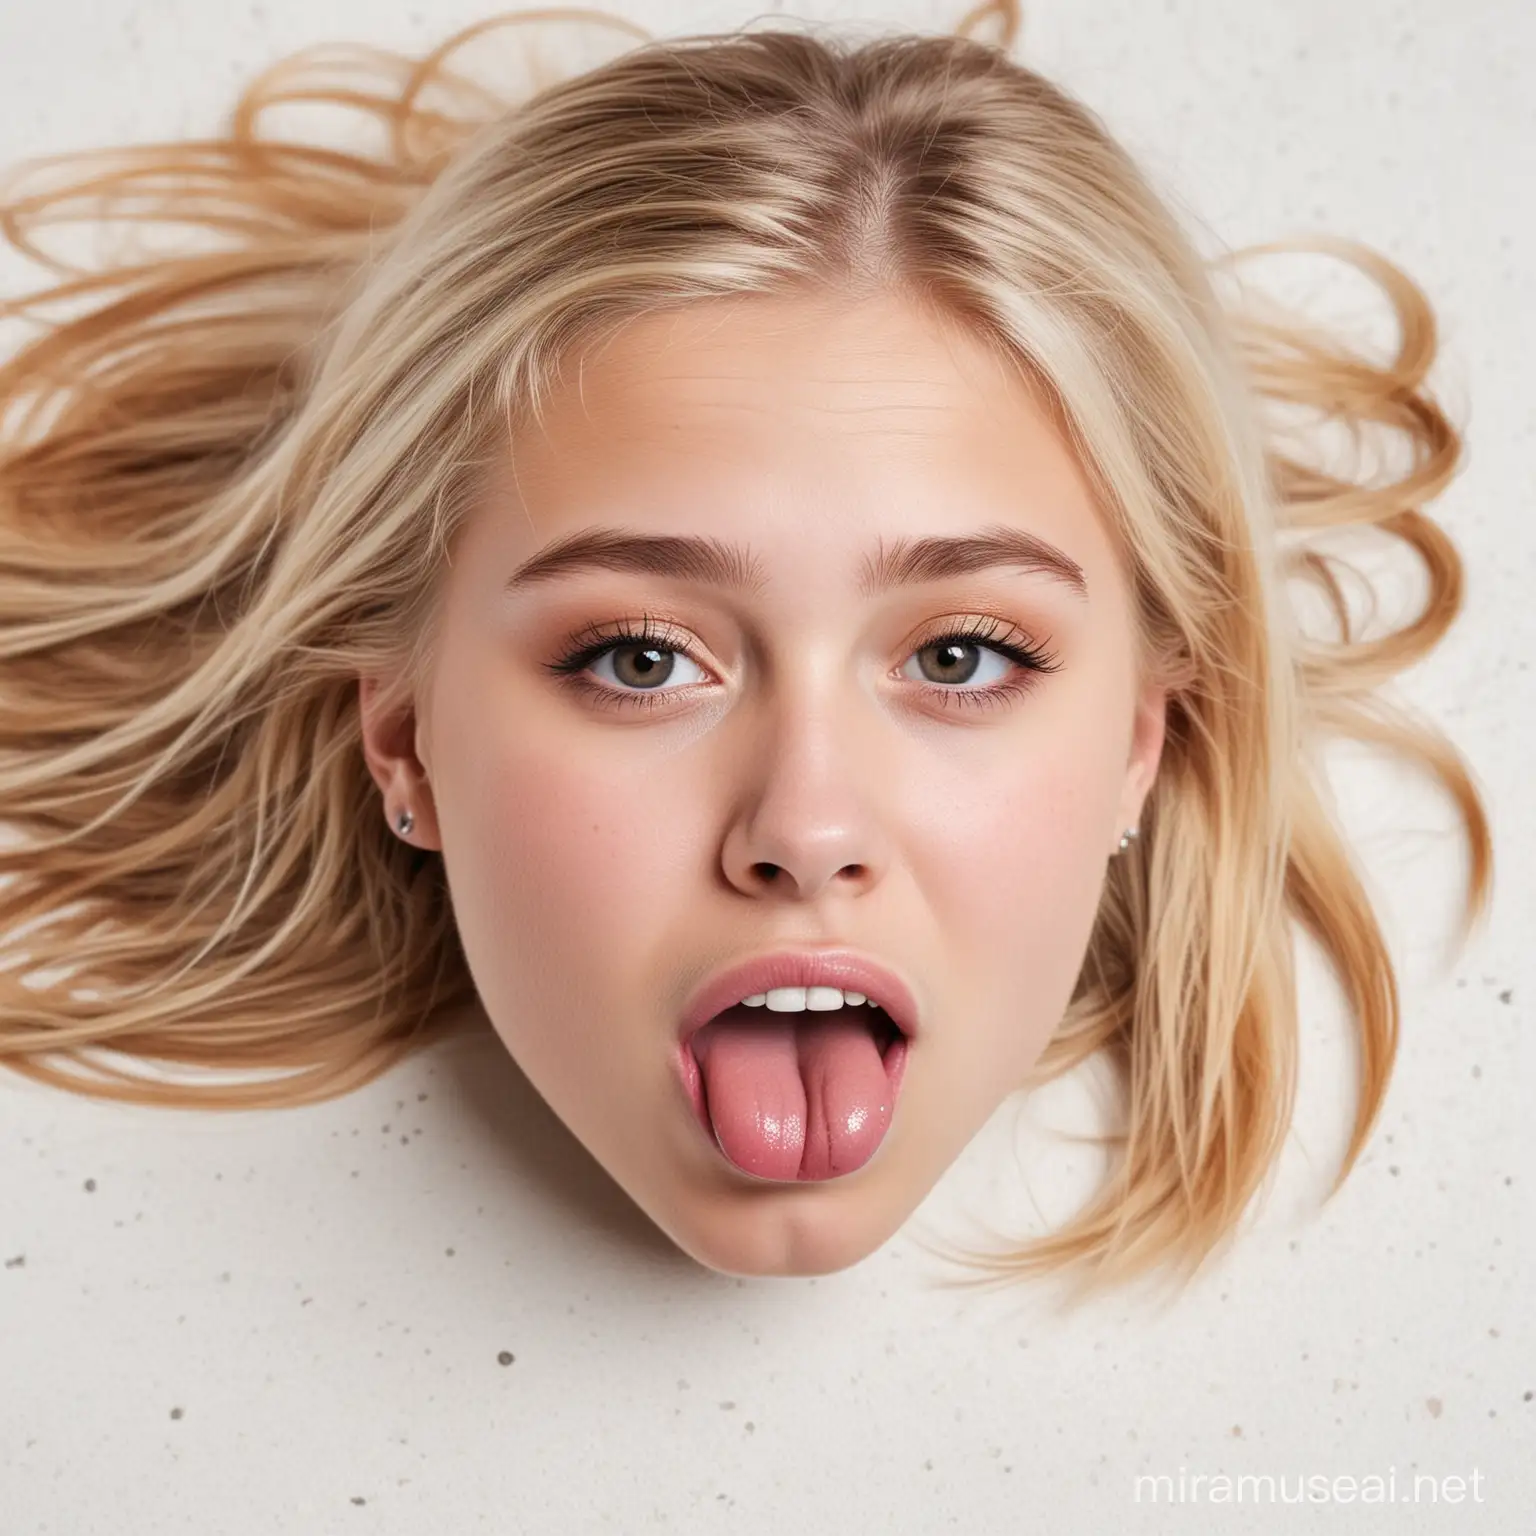 A  blonde girl sticking out her tongue, lying on the ground, white background.